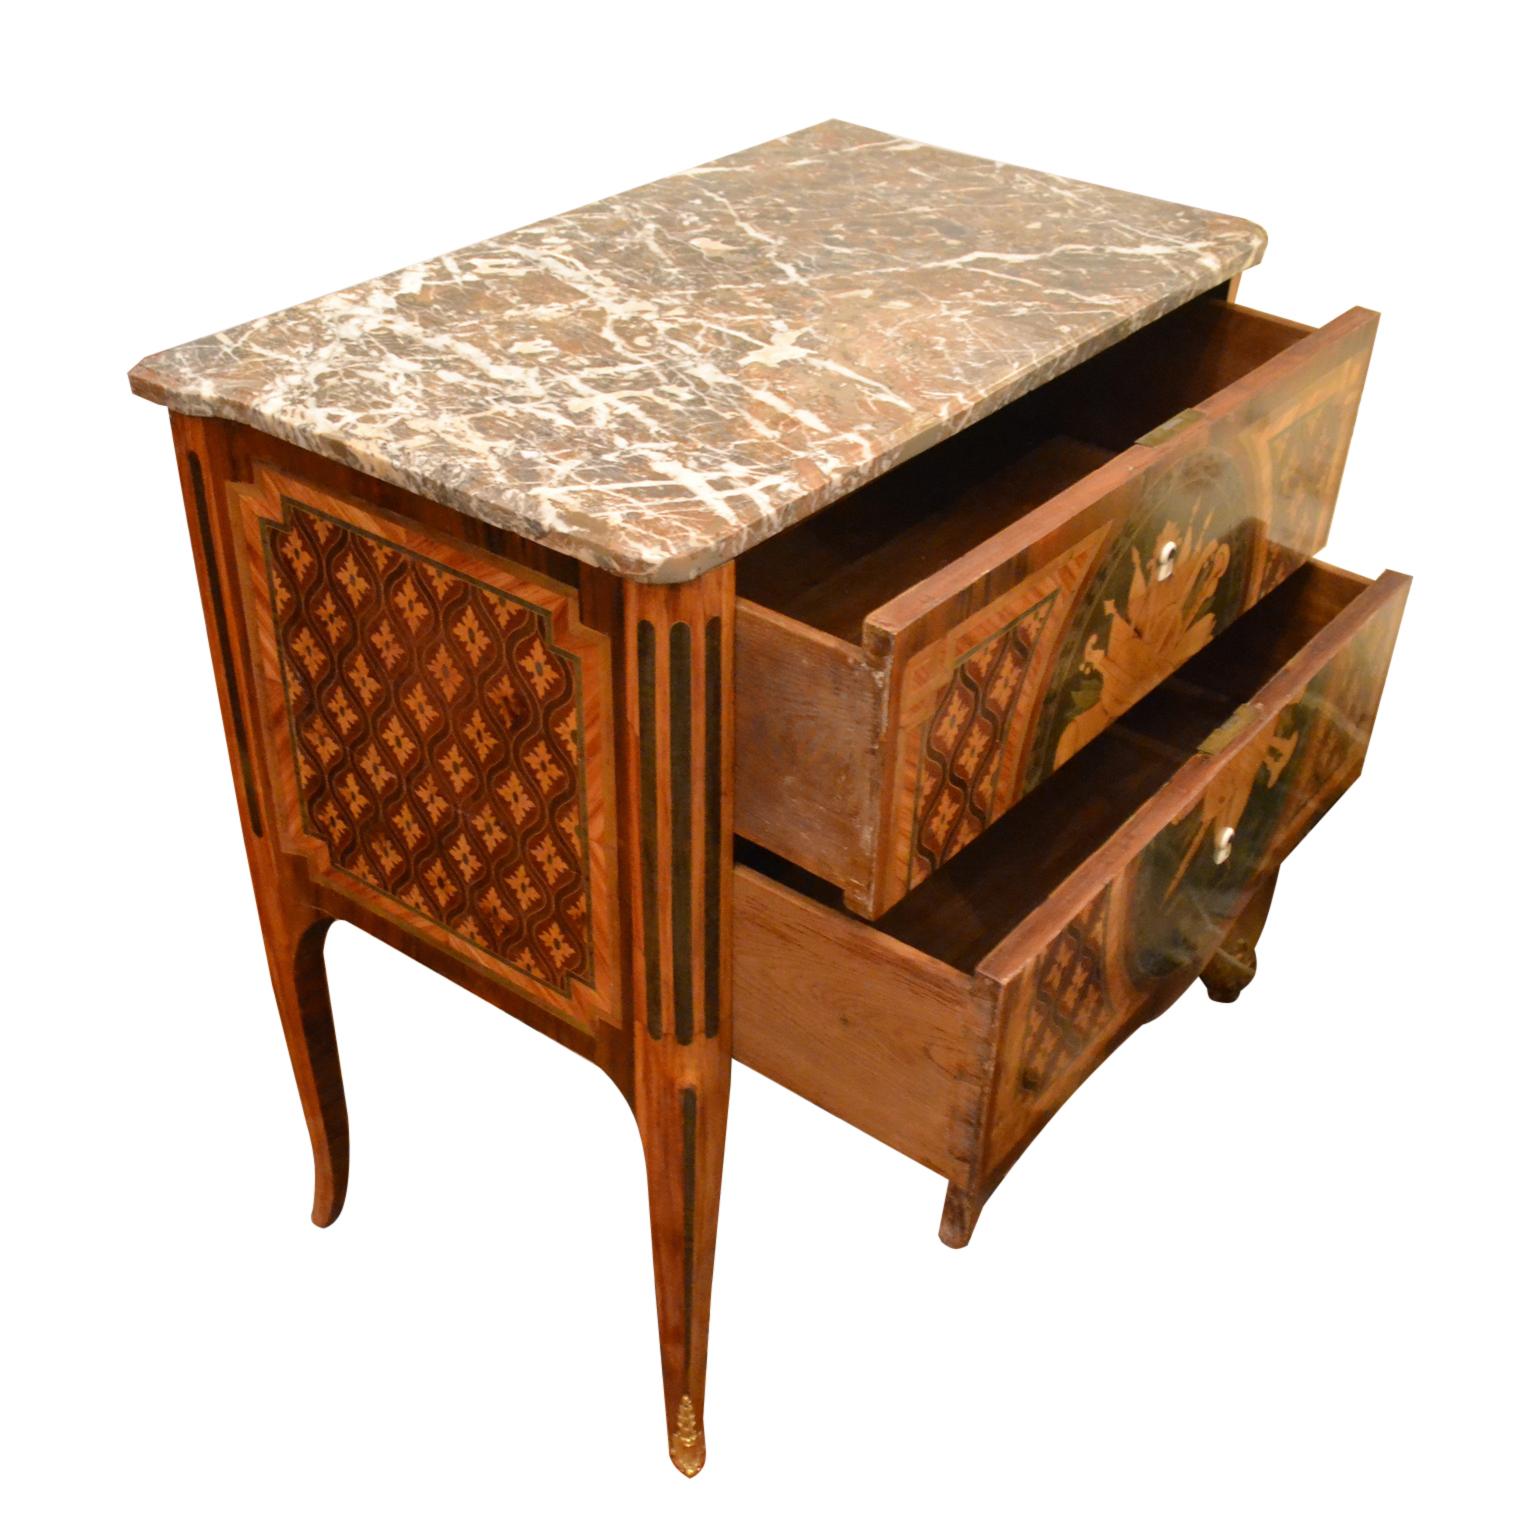 A period 18th century French two drawer chest with a breche marble top, the oak carcass veneered in various exotic woods in an overall geometric design. The large inlaid oval panel to the front shows various musical instruments in a heraldic